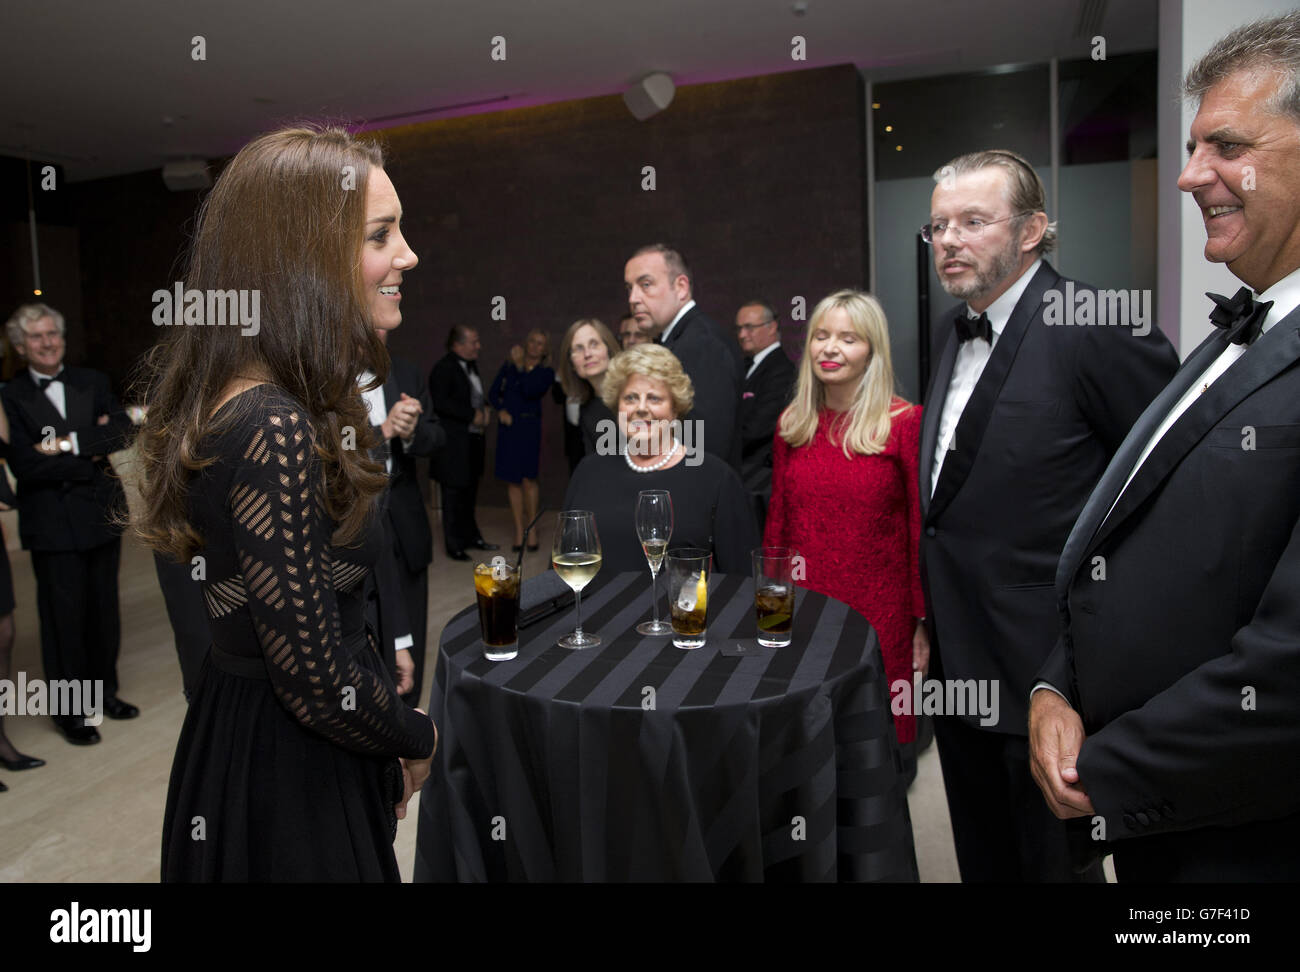 The Duchess of Cambridge (left) greets supporters, including Han Rausing (second right) and his wife Julia Delves Broughton (centre) as she attends an Autumn Gala evening in support of Action on Addiction. Stock Photo